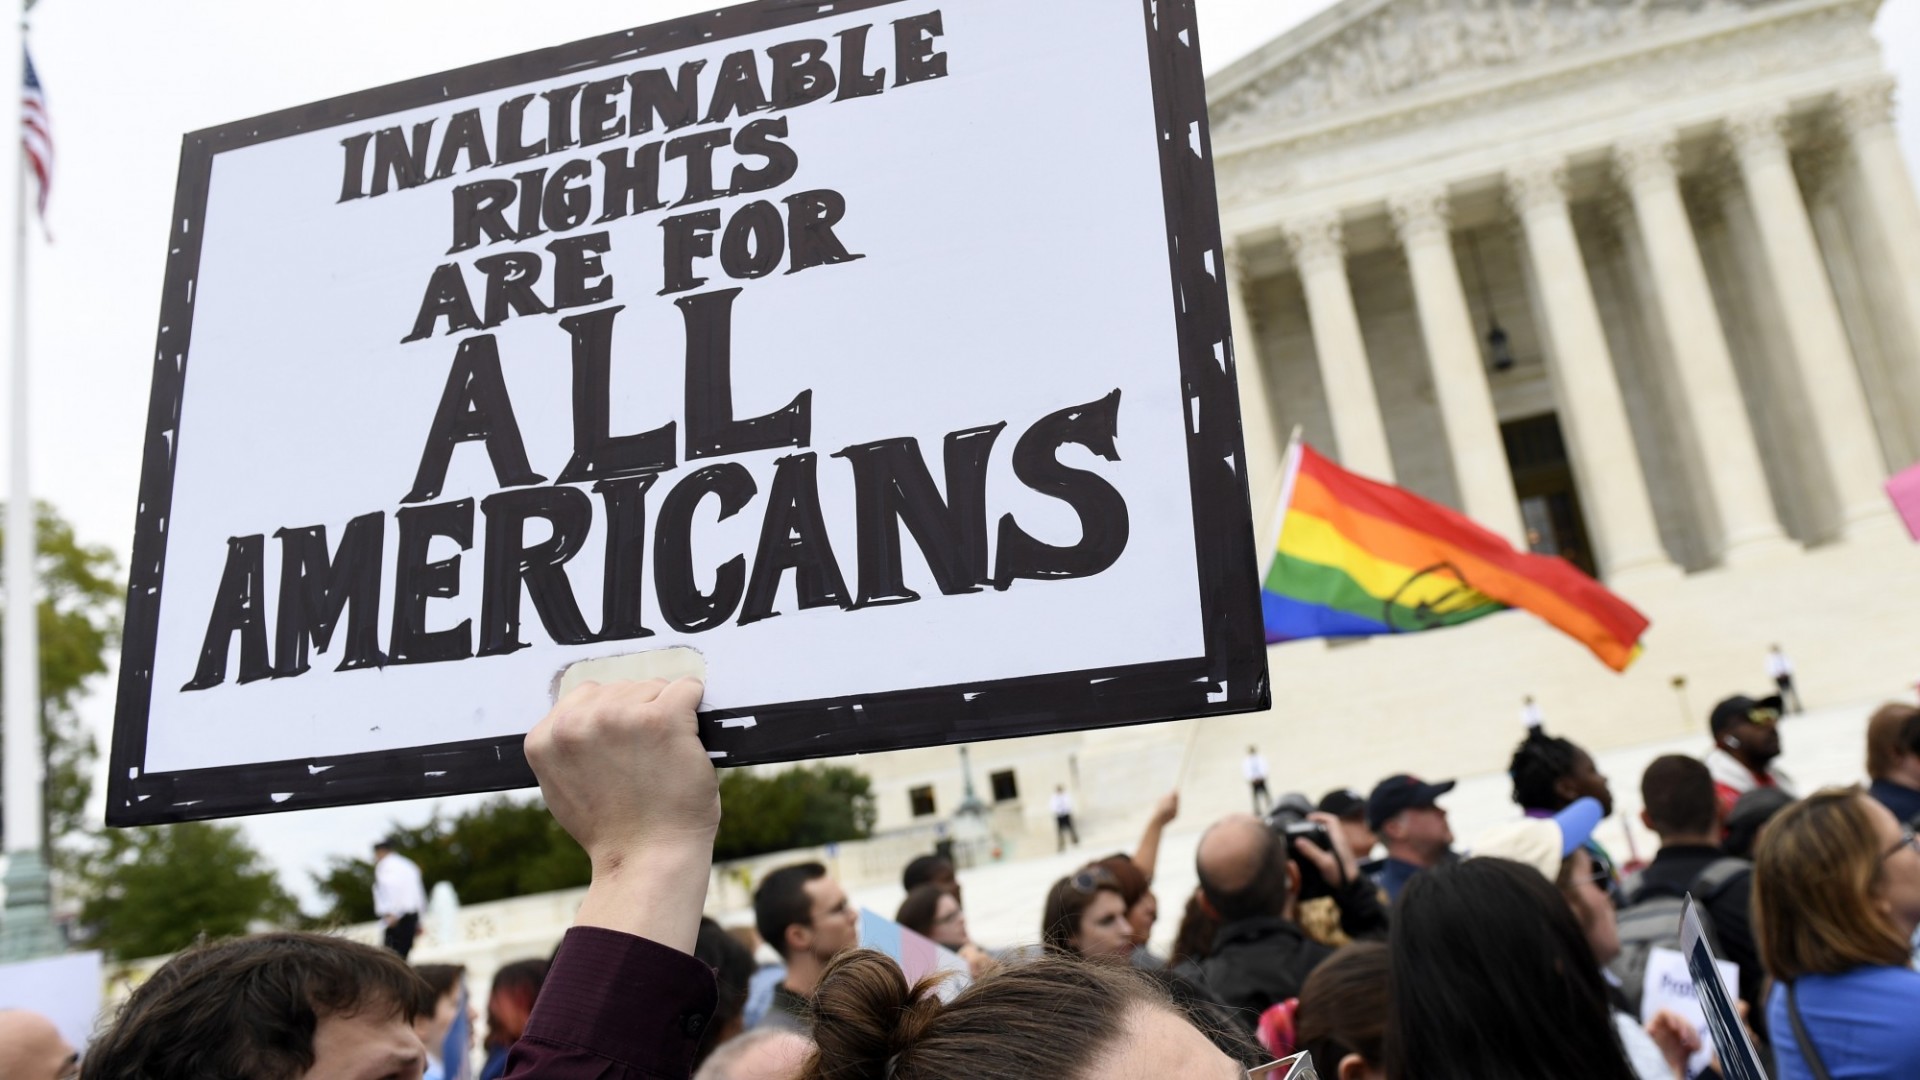 Photo of a sign being held up, reading "Inalienable rights for ALL Americans"